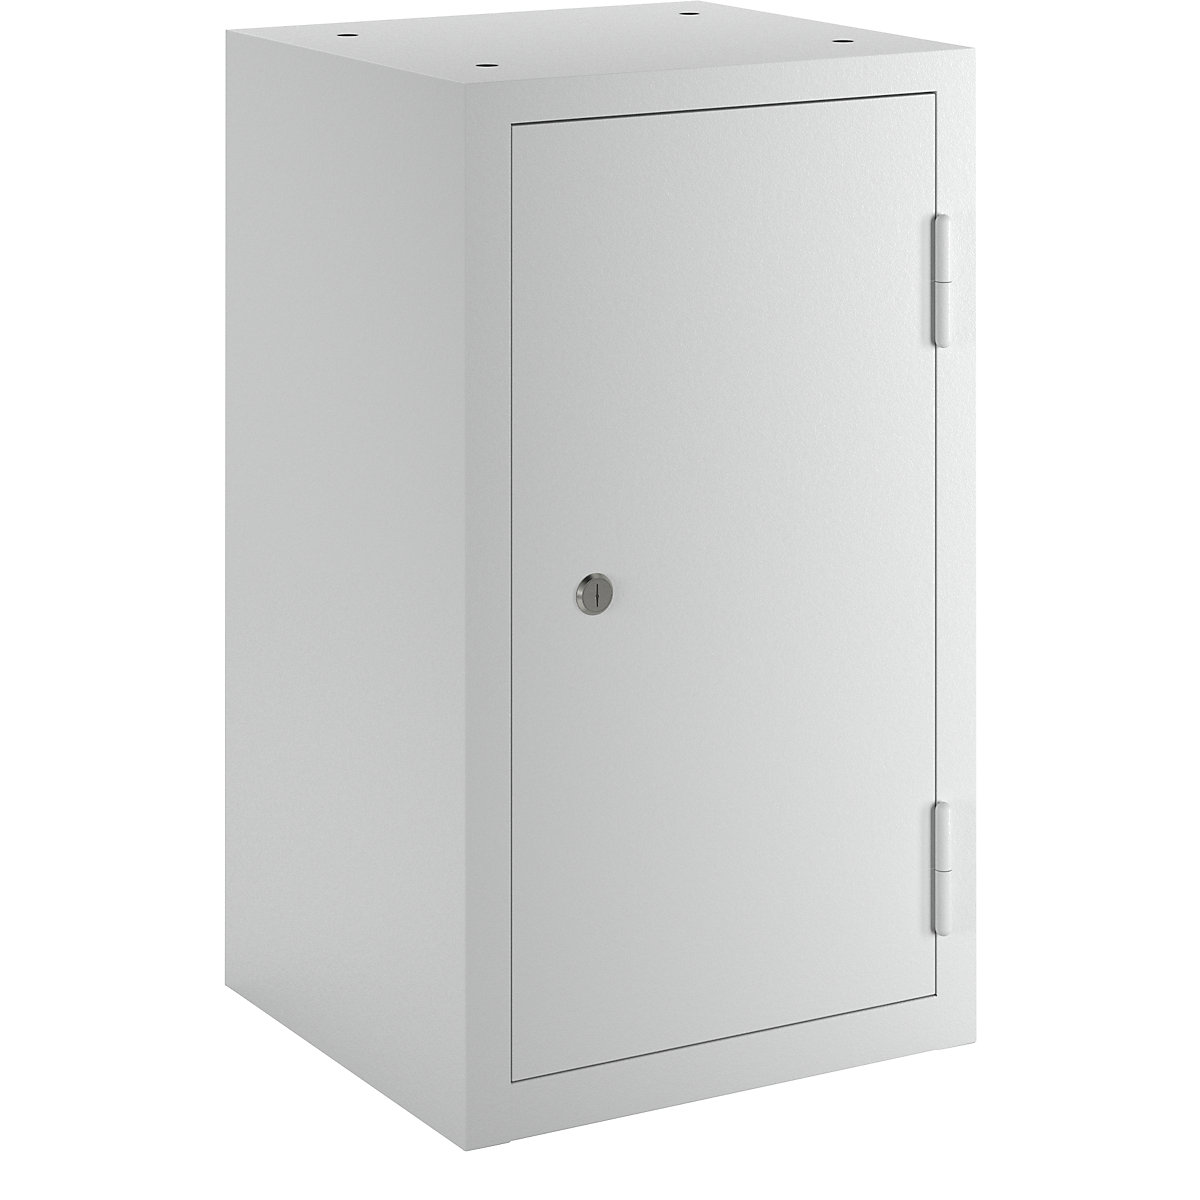 Wall mounted cupboard for the workshop – eurokraft basic, HxWxD 600 x 350 x 320 mm, solid panel doors, light grey RAL 7035-6